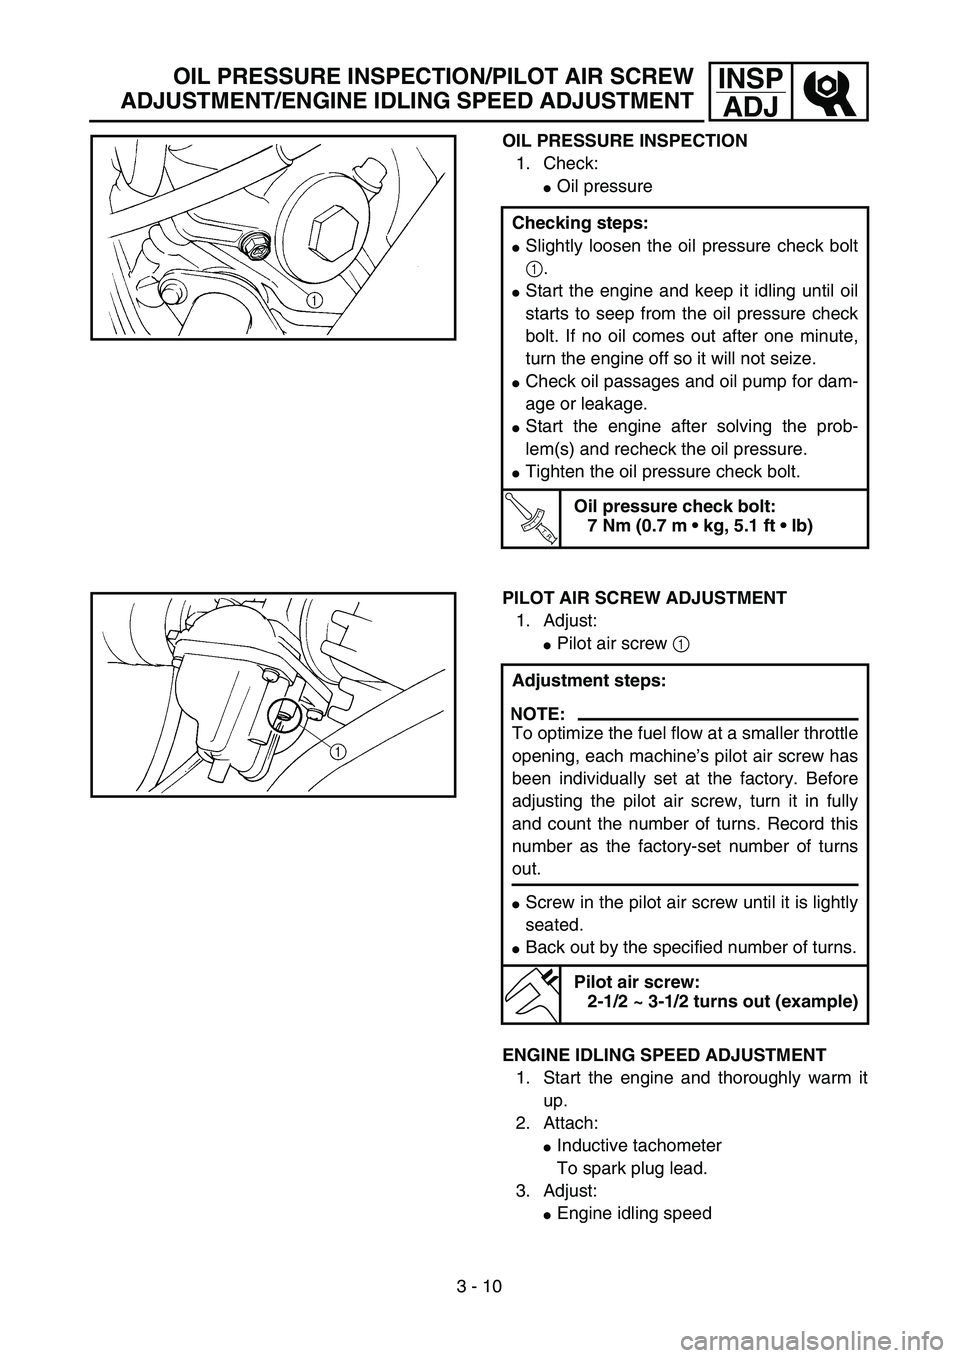 YAMAHA TTR125 2005  Notices Demploi (in French) 3 - 10
INSP
ADJOIL PRESSURE INSPECTION/PILOT AIR SCREW
ADJUSTMENT/ENGINE IDLING SPEED ADJUSTMENT
OIL PRESSURE INSPECTION
1. Check:
Oil pressure
Checking steps:
Slightly loosen the oil pressure check